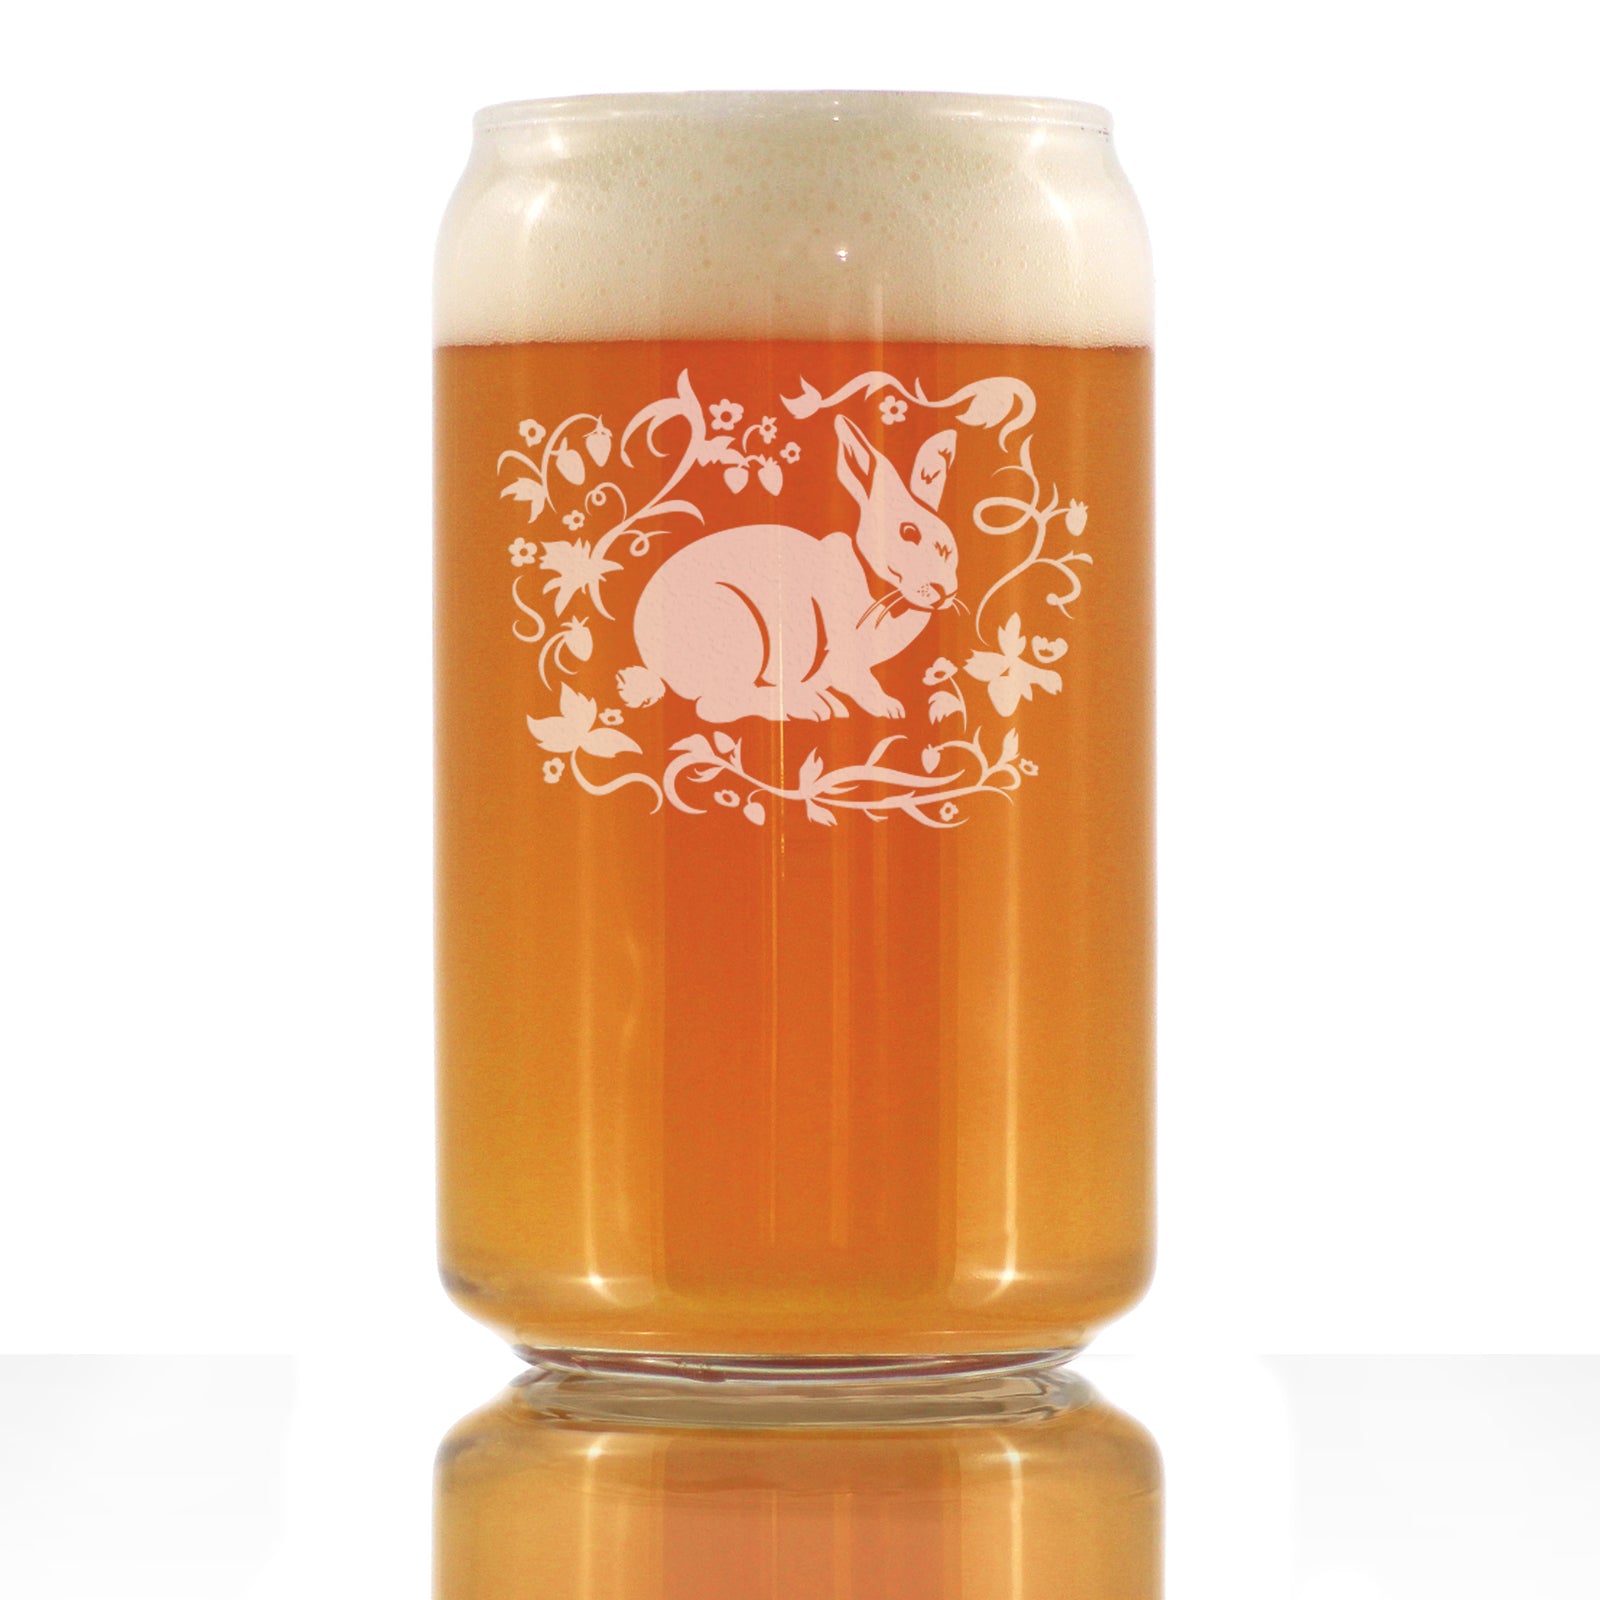 Berry Patch Bunny Rabbit - Beer Can Pint Glass - Hand Engraved Gifts for Men & Women That Love Bunnies